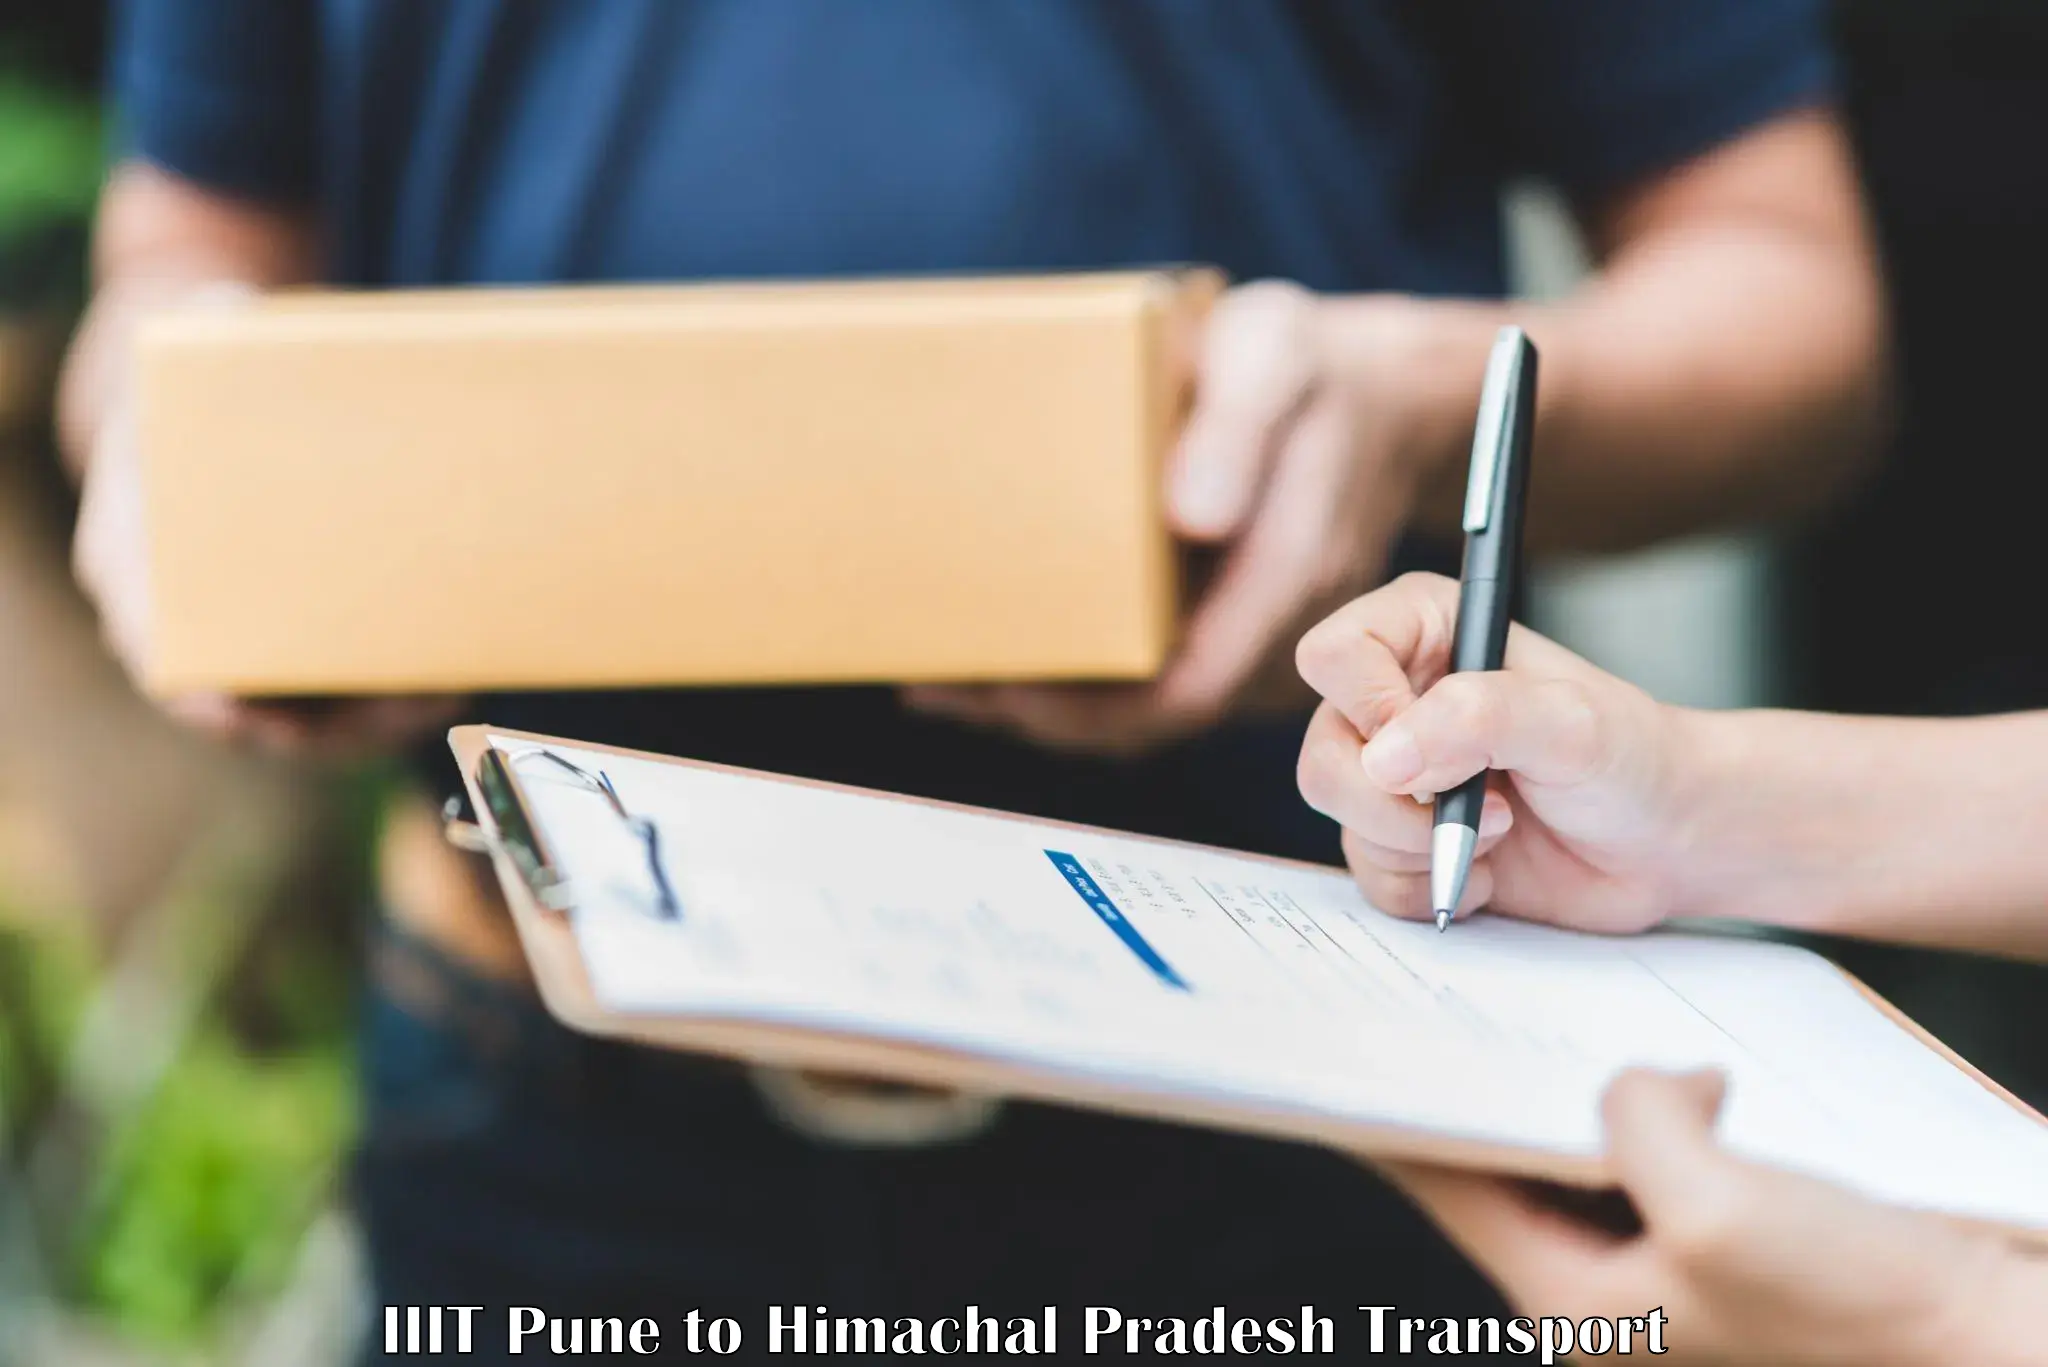 Express transport services IIIT Pune to Shimla